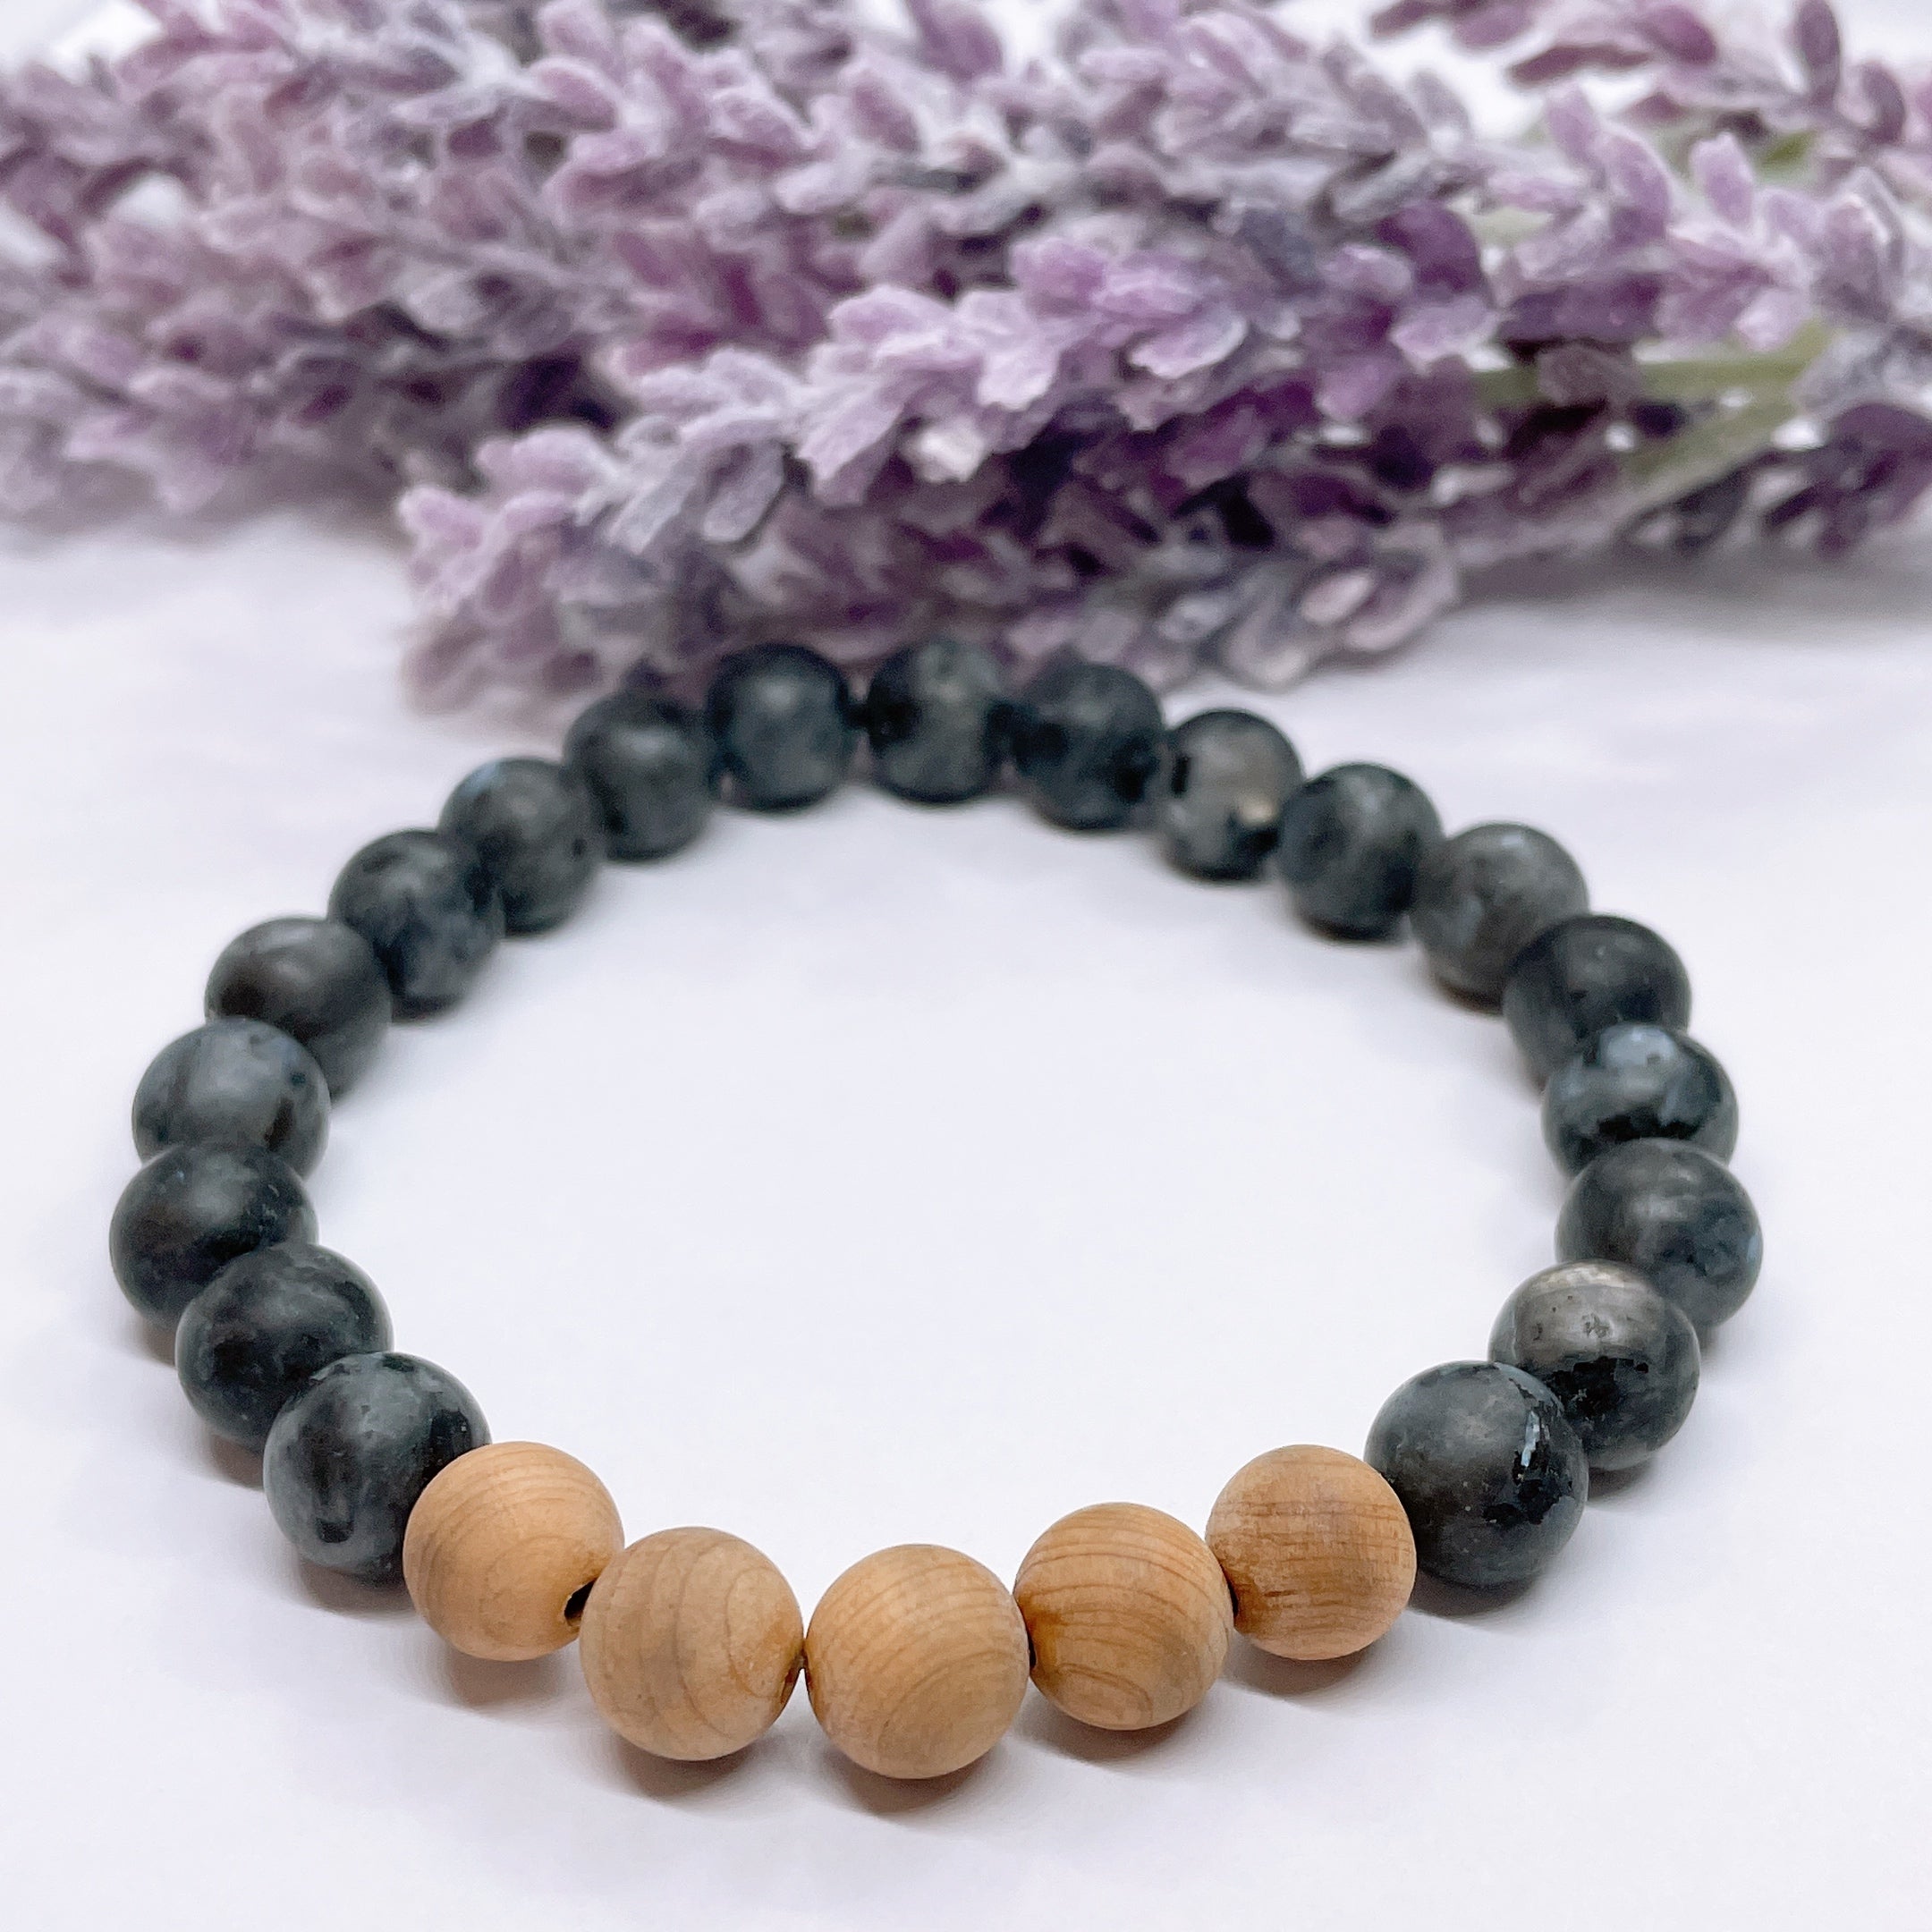 A black beaded bracelet with 19 black labradorite beads with 5 cedar wood brown beads on a white table with a purple flower on the table.